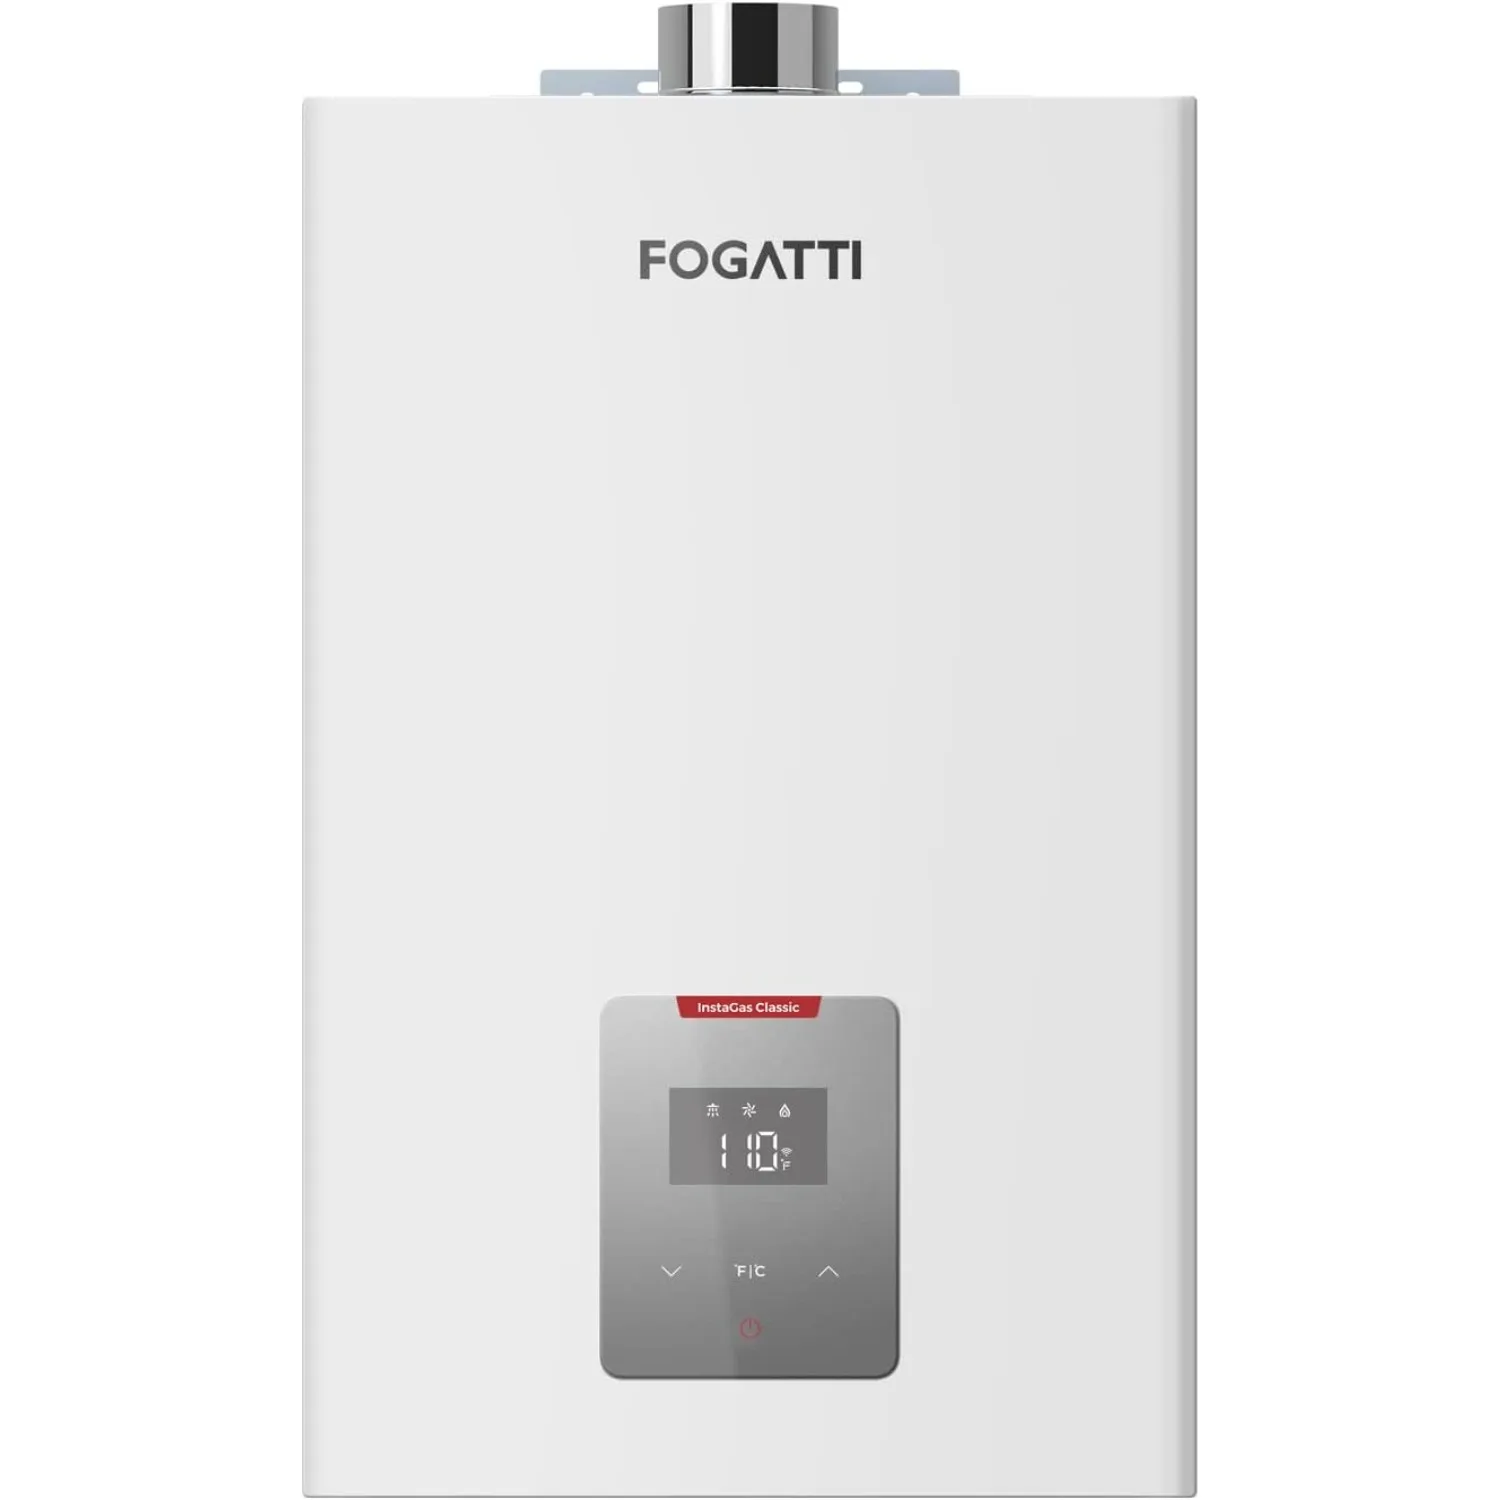 

FOGATTI Natural Gas Tankless Water Heater, Indoor 4.0 GPM, 90,000 BTU Instant Hot Water Heater, InstaGas Classic 90